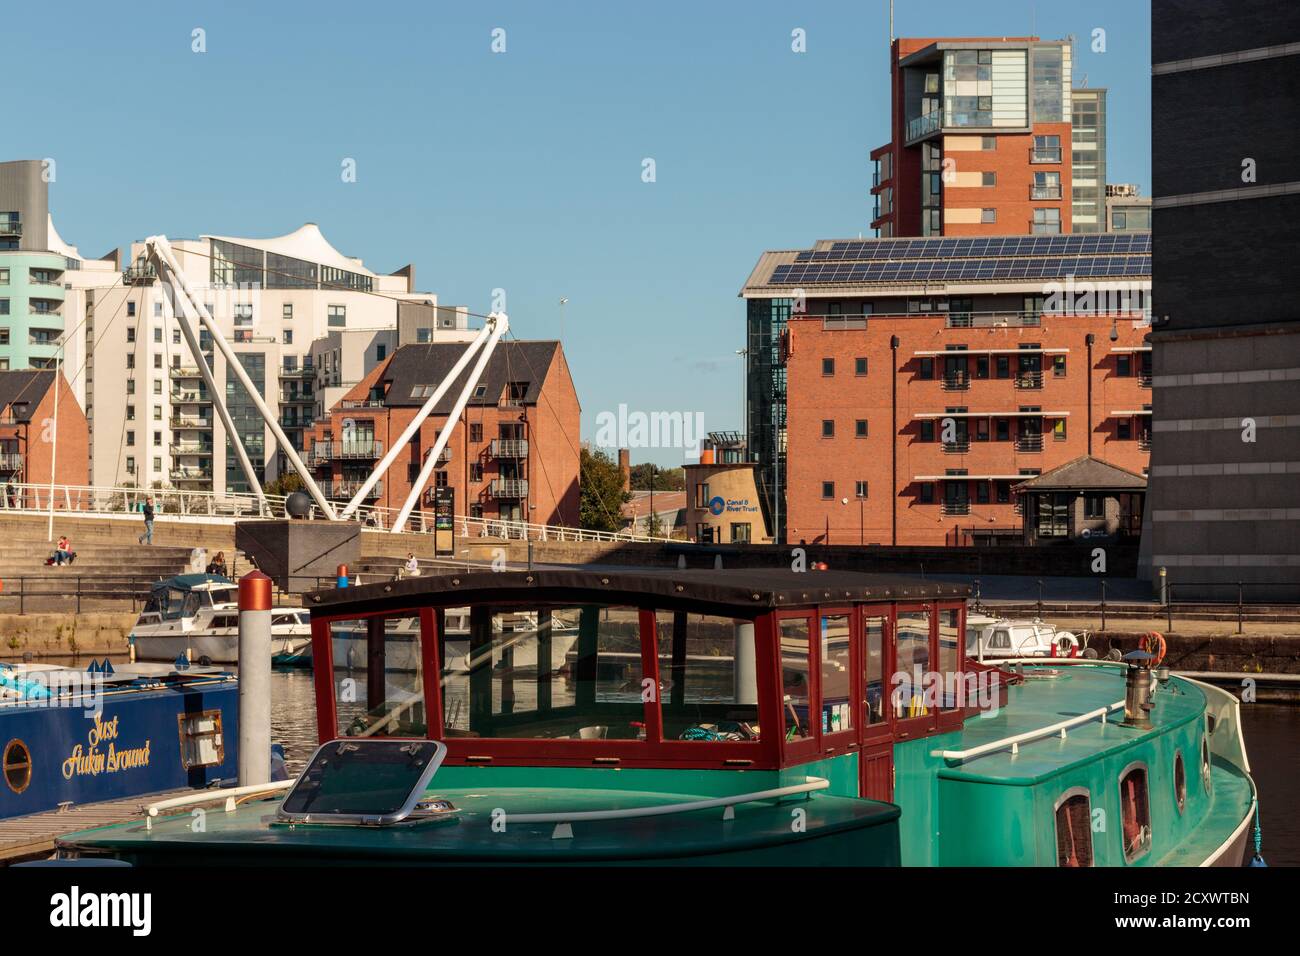 View of unidentified people and canal boats moored in Leeds Dock Stock Photo